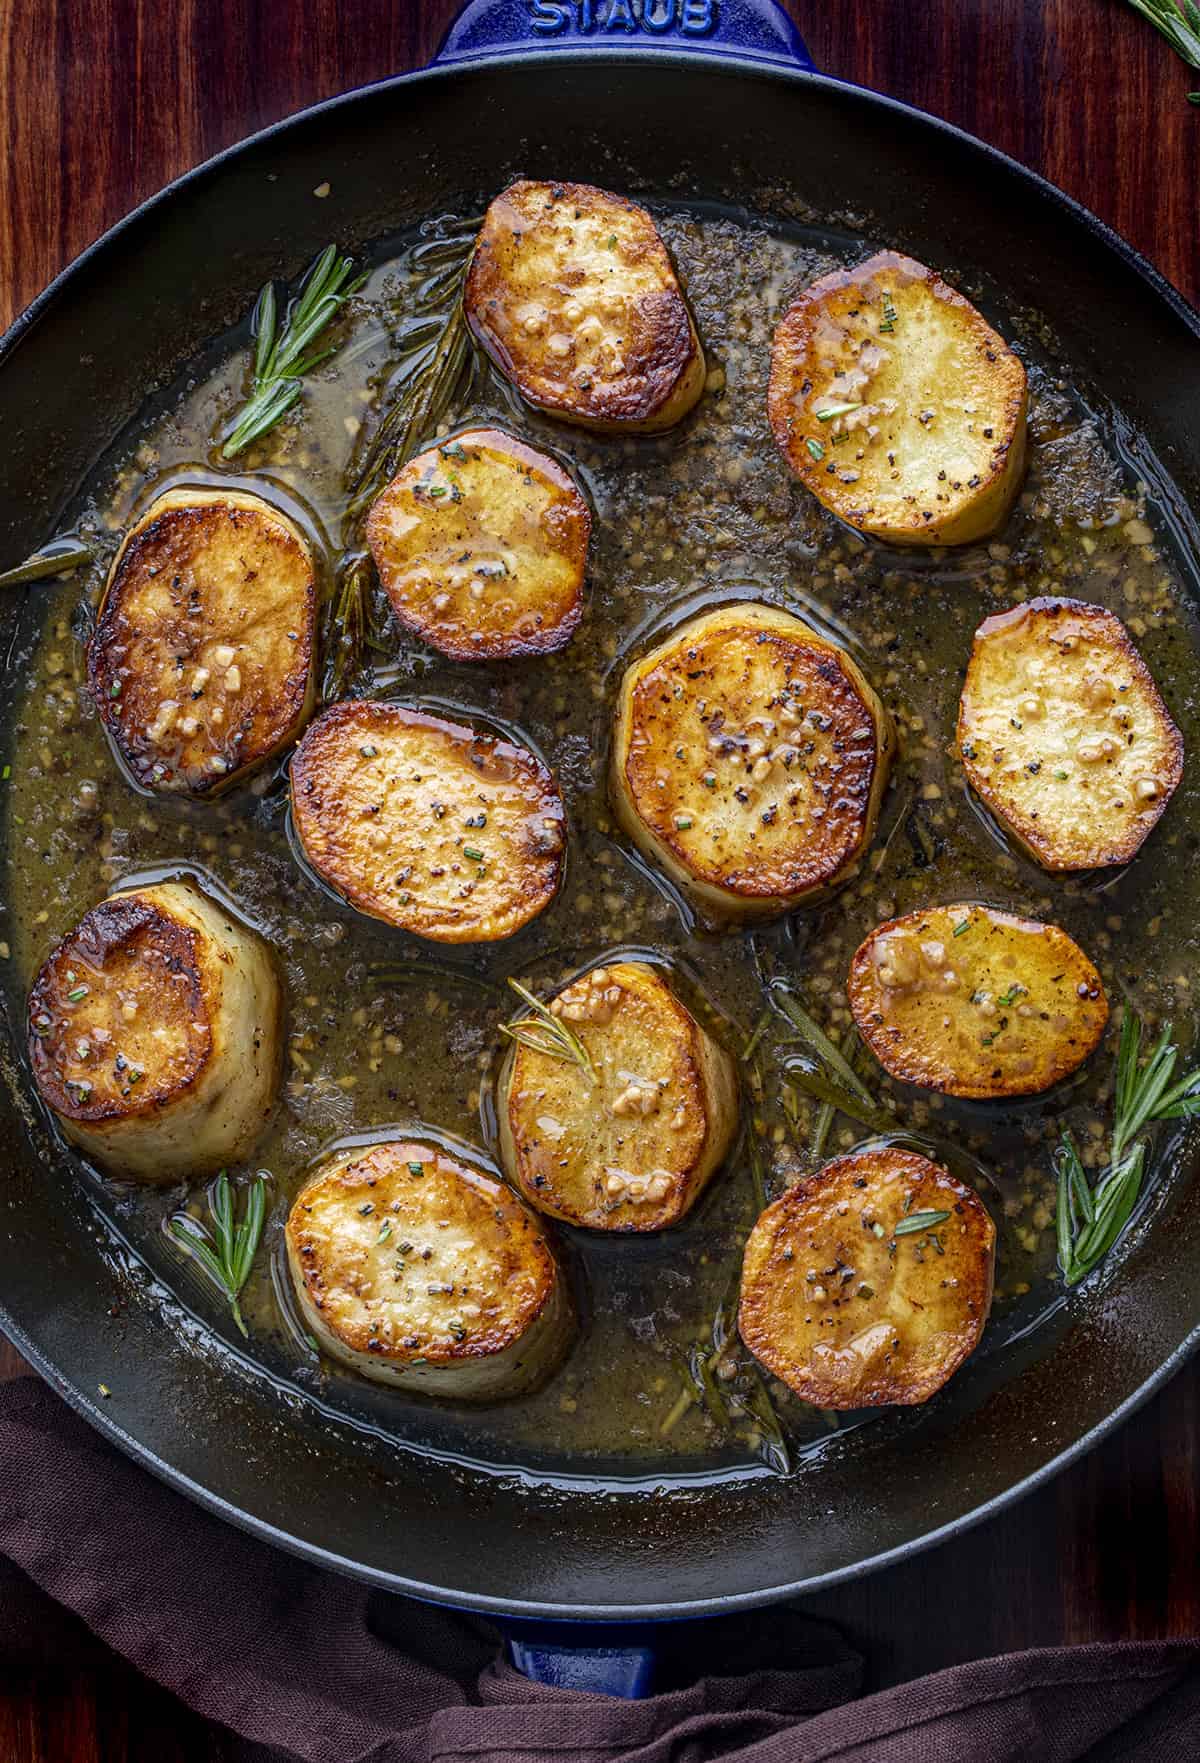 Skillet with Fondant Potatoes - Melting Potatoes in it from overhead